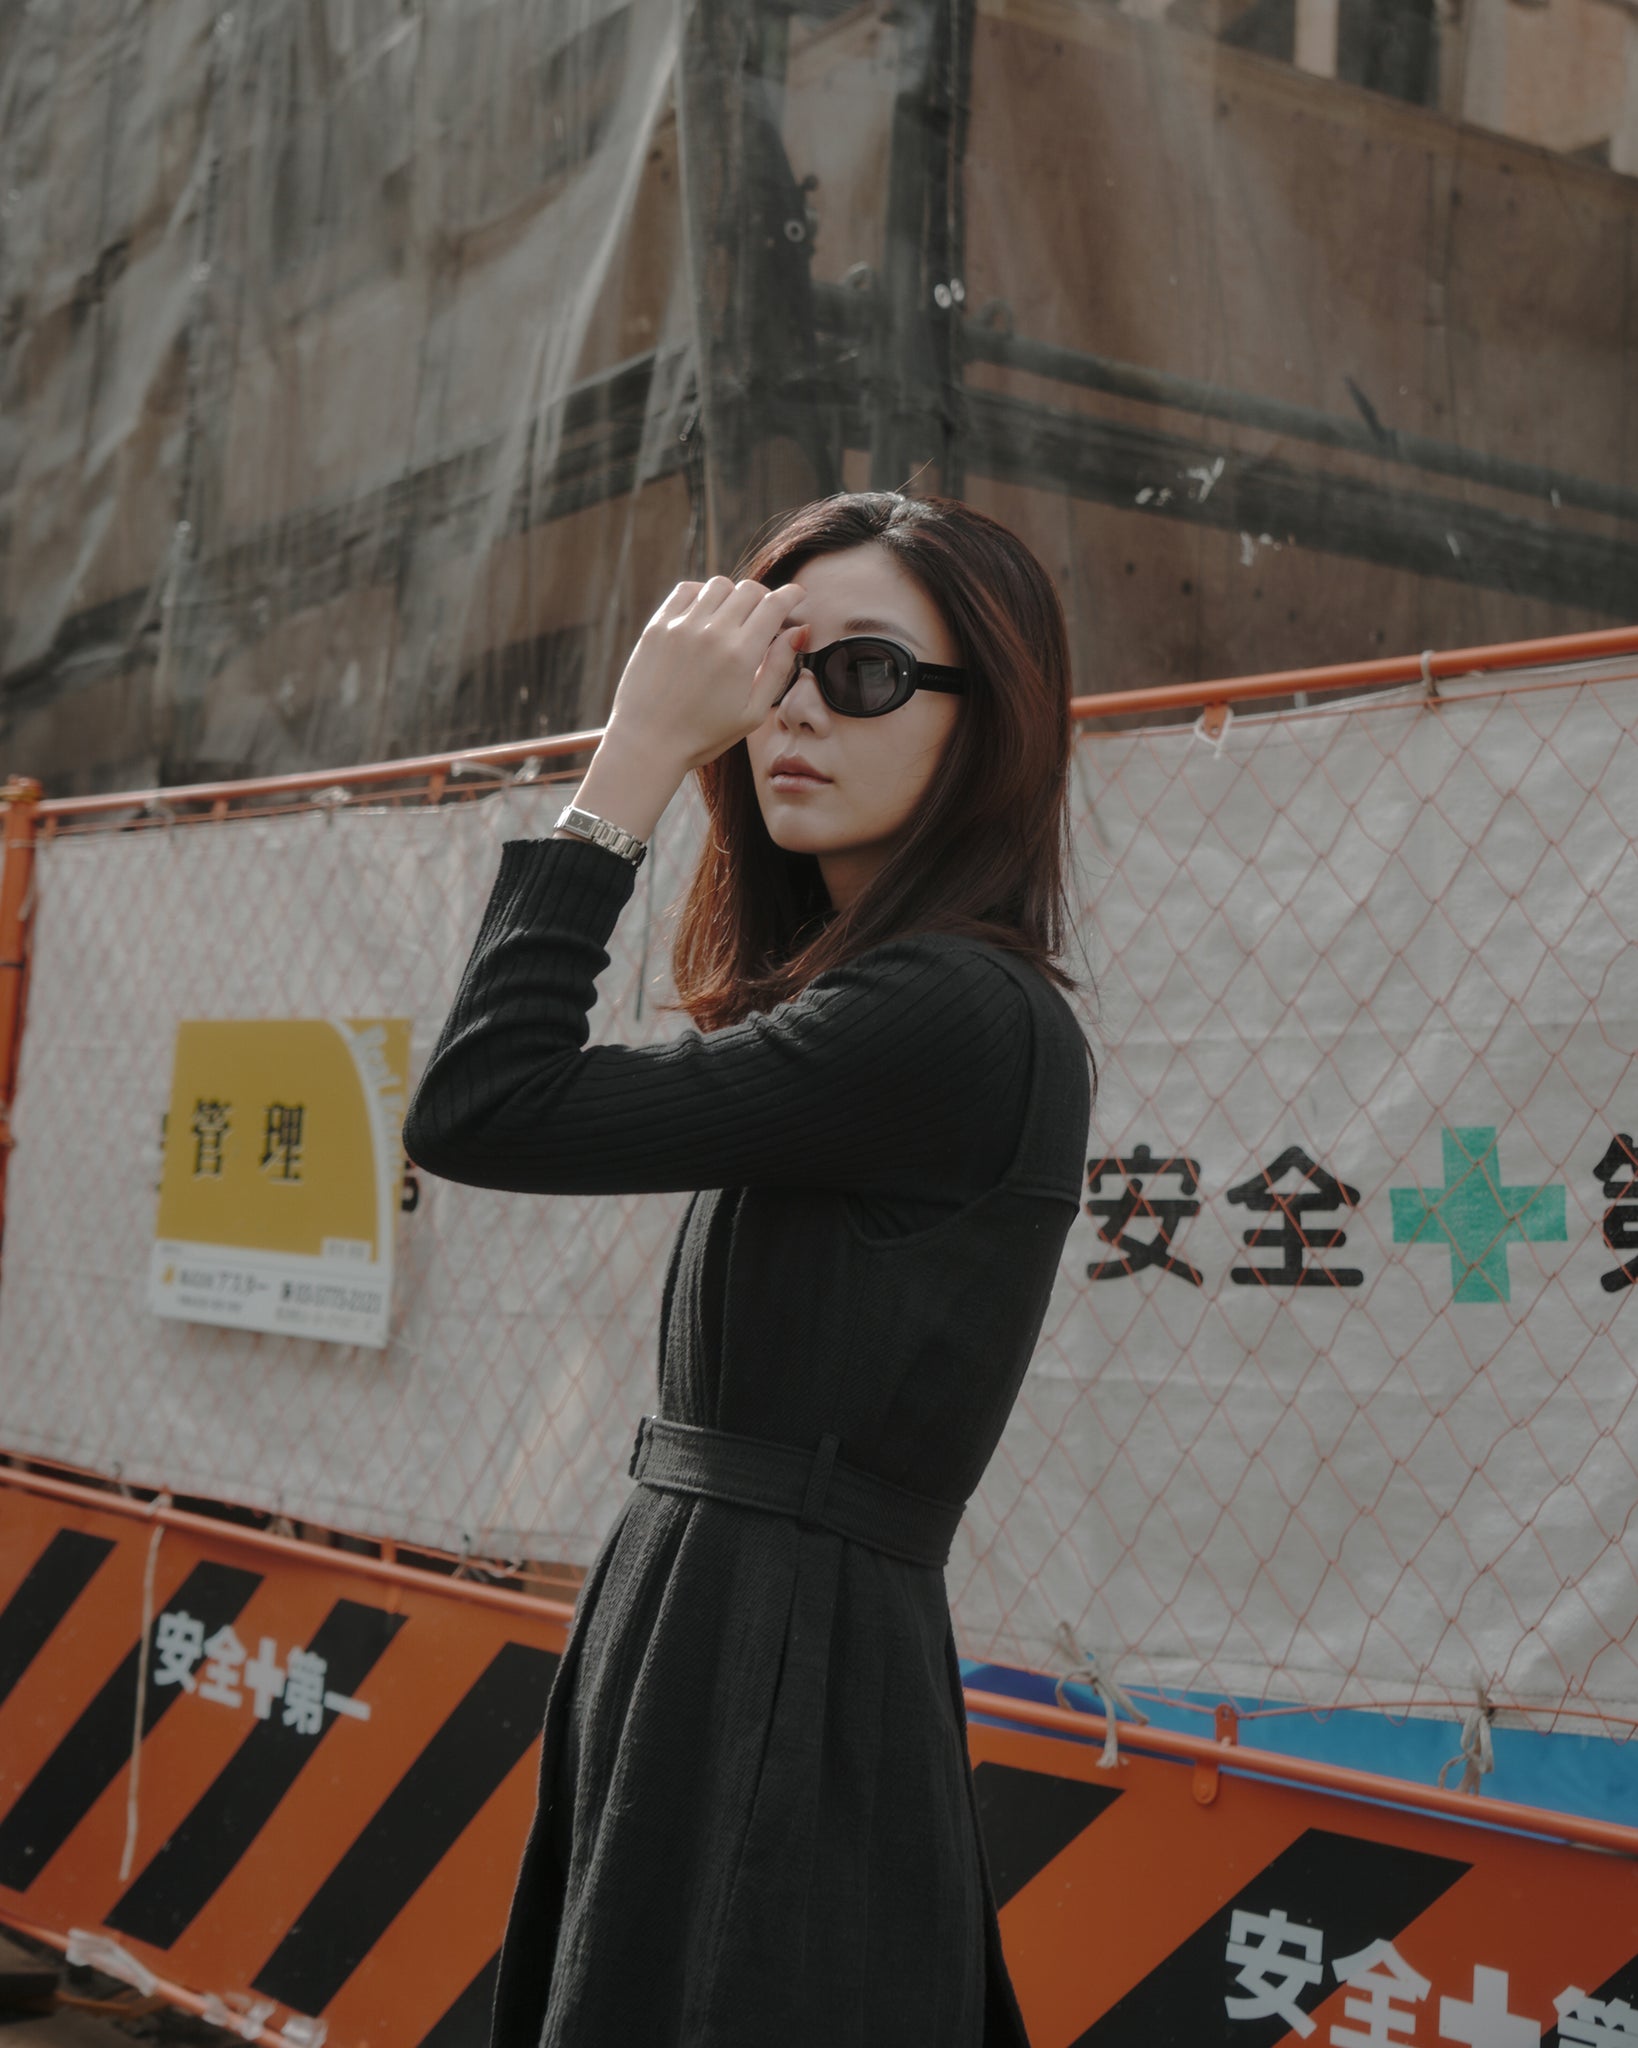 BR01｜SUNGLASSES SERIES - univers hsieh